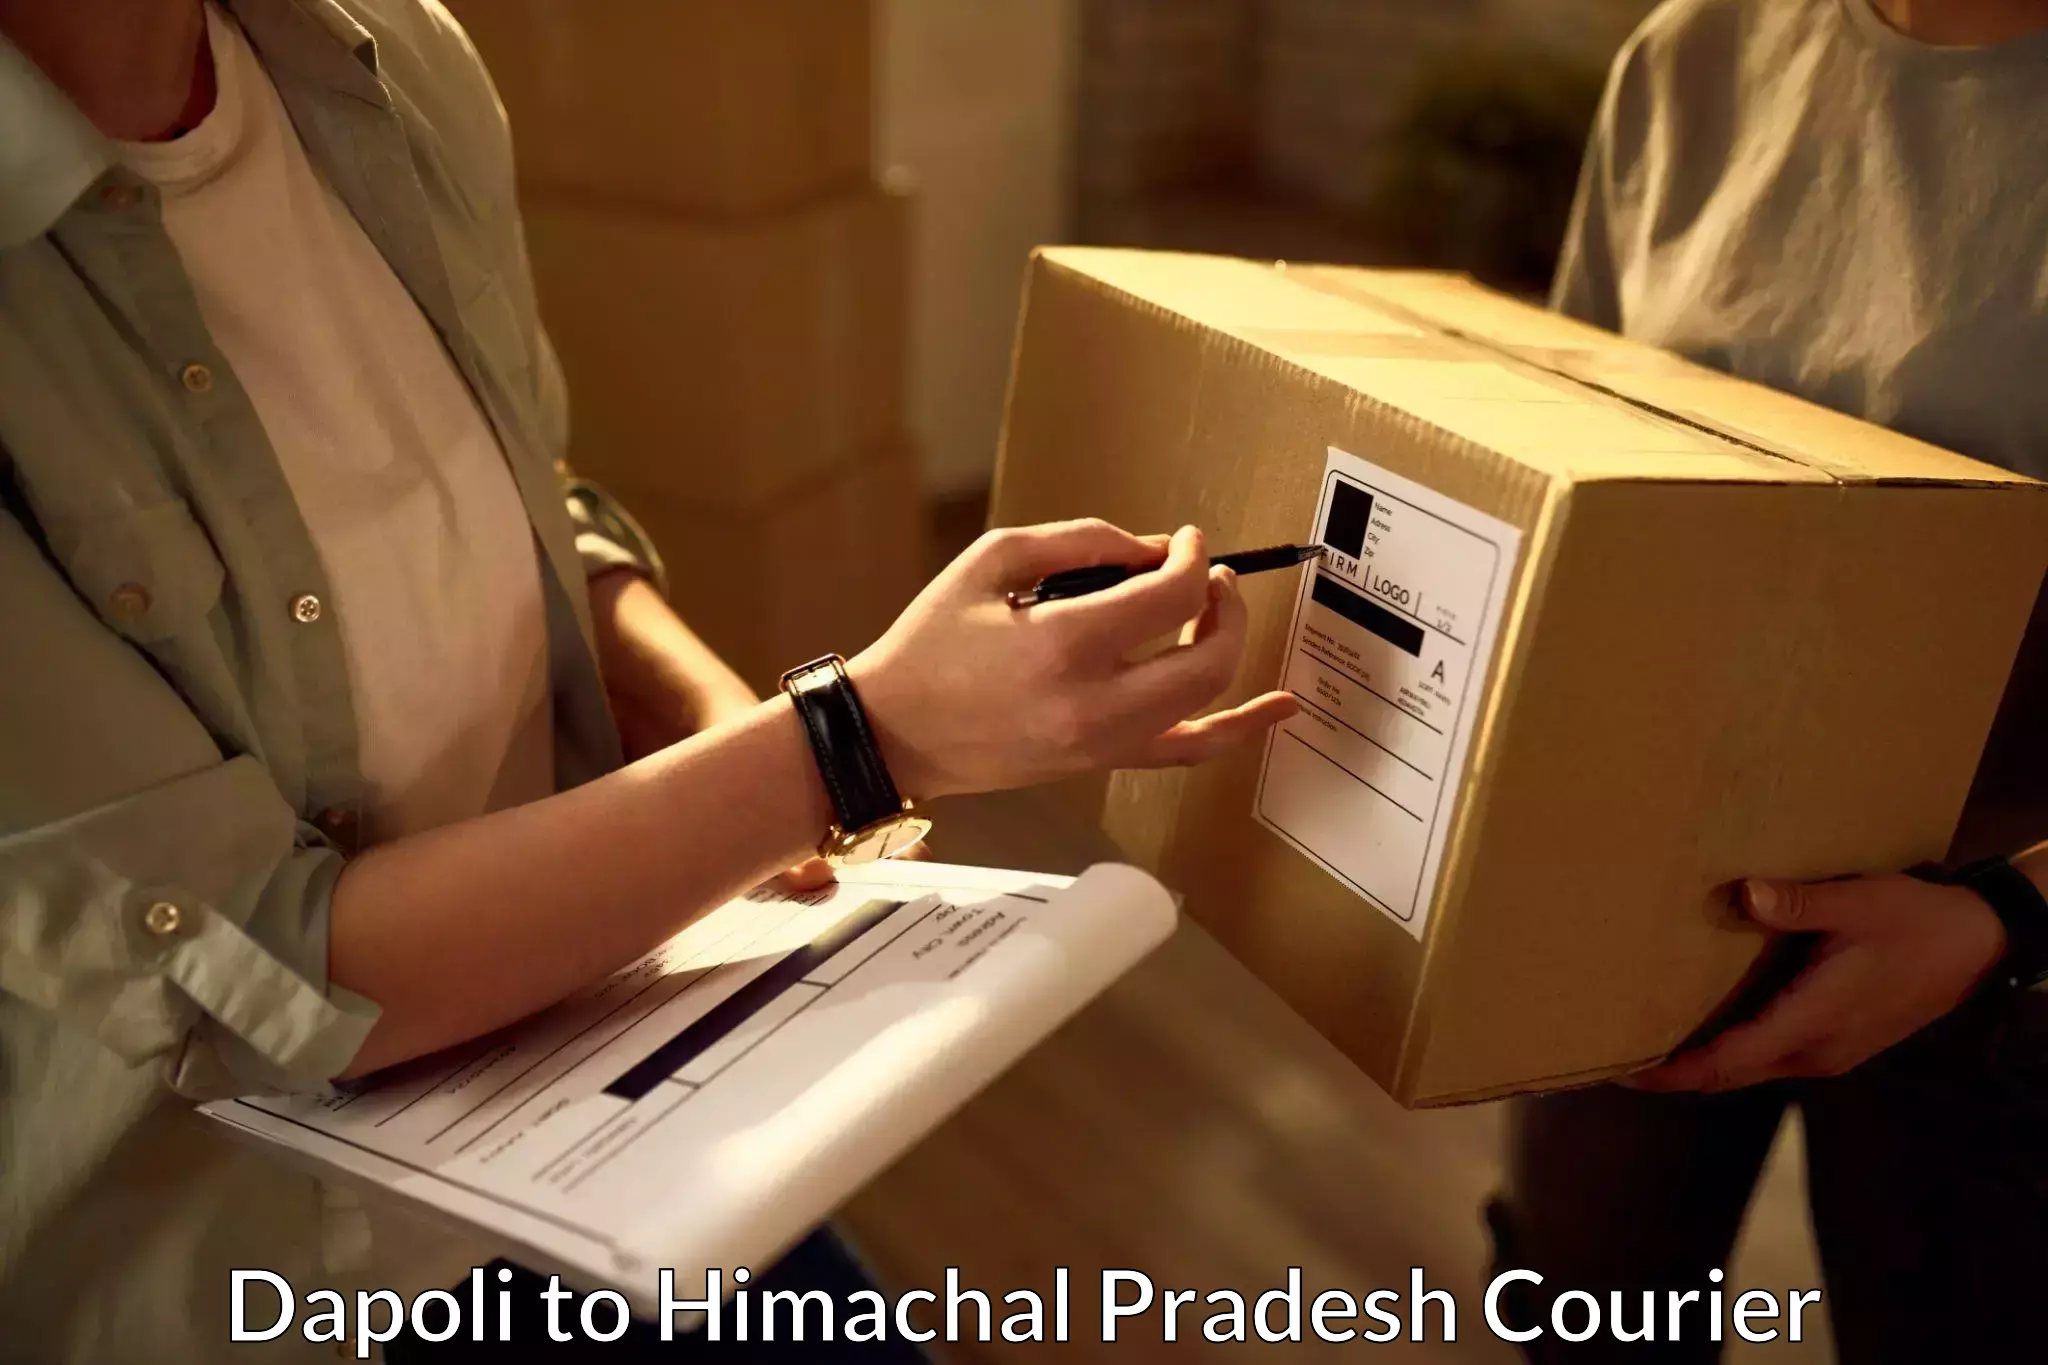 Advanced tracking systems in Dapoli to Himachal Pradesh